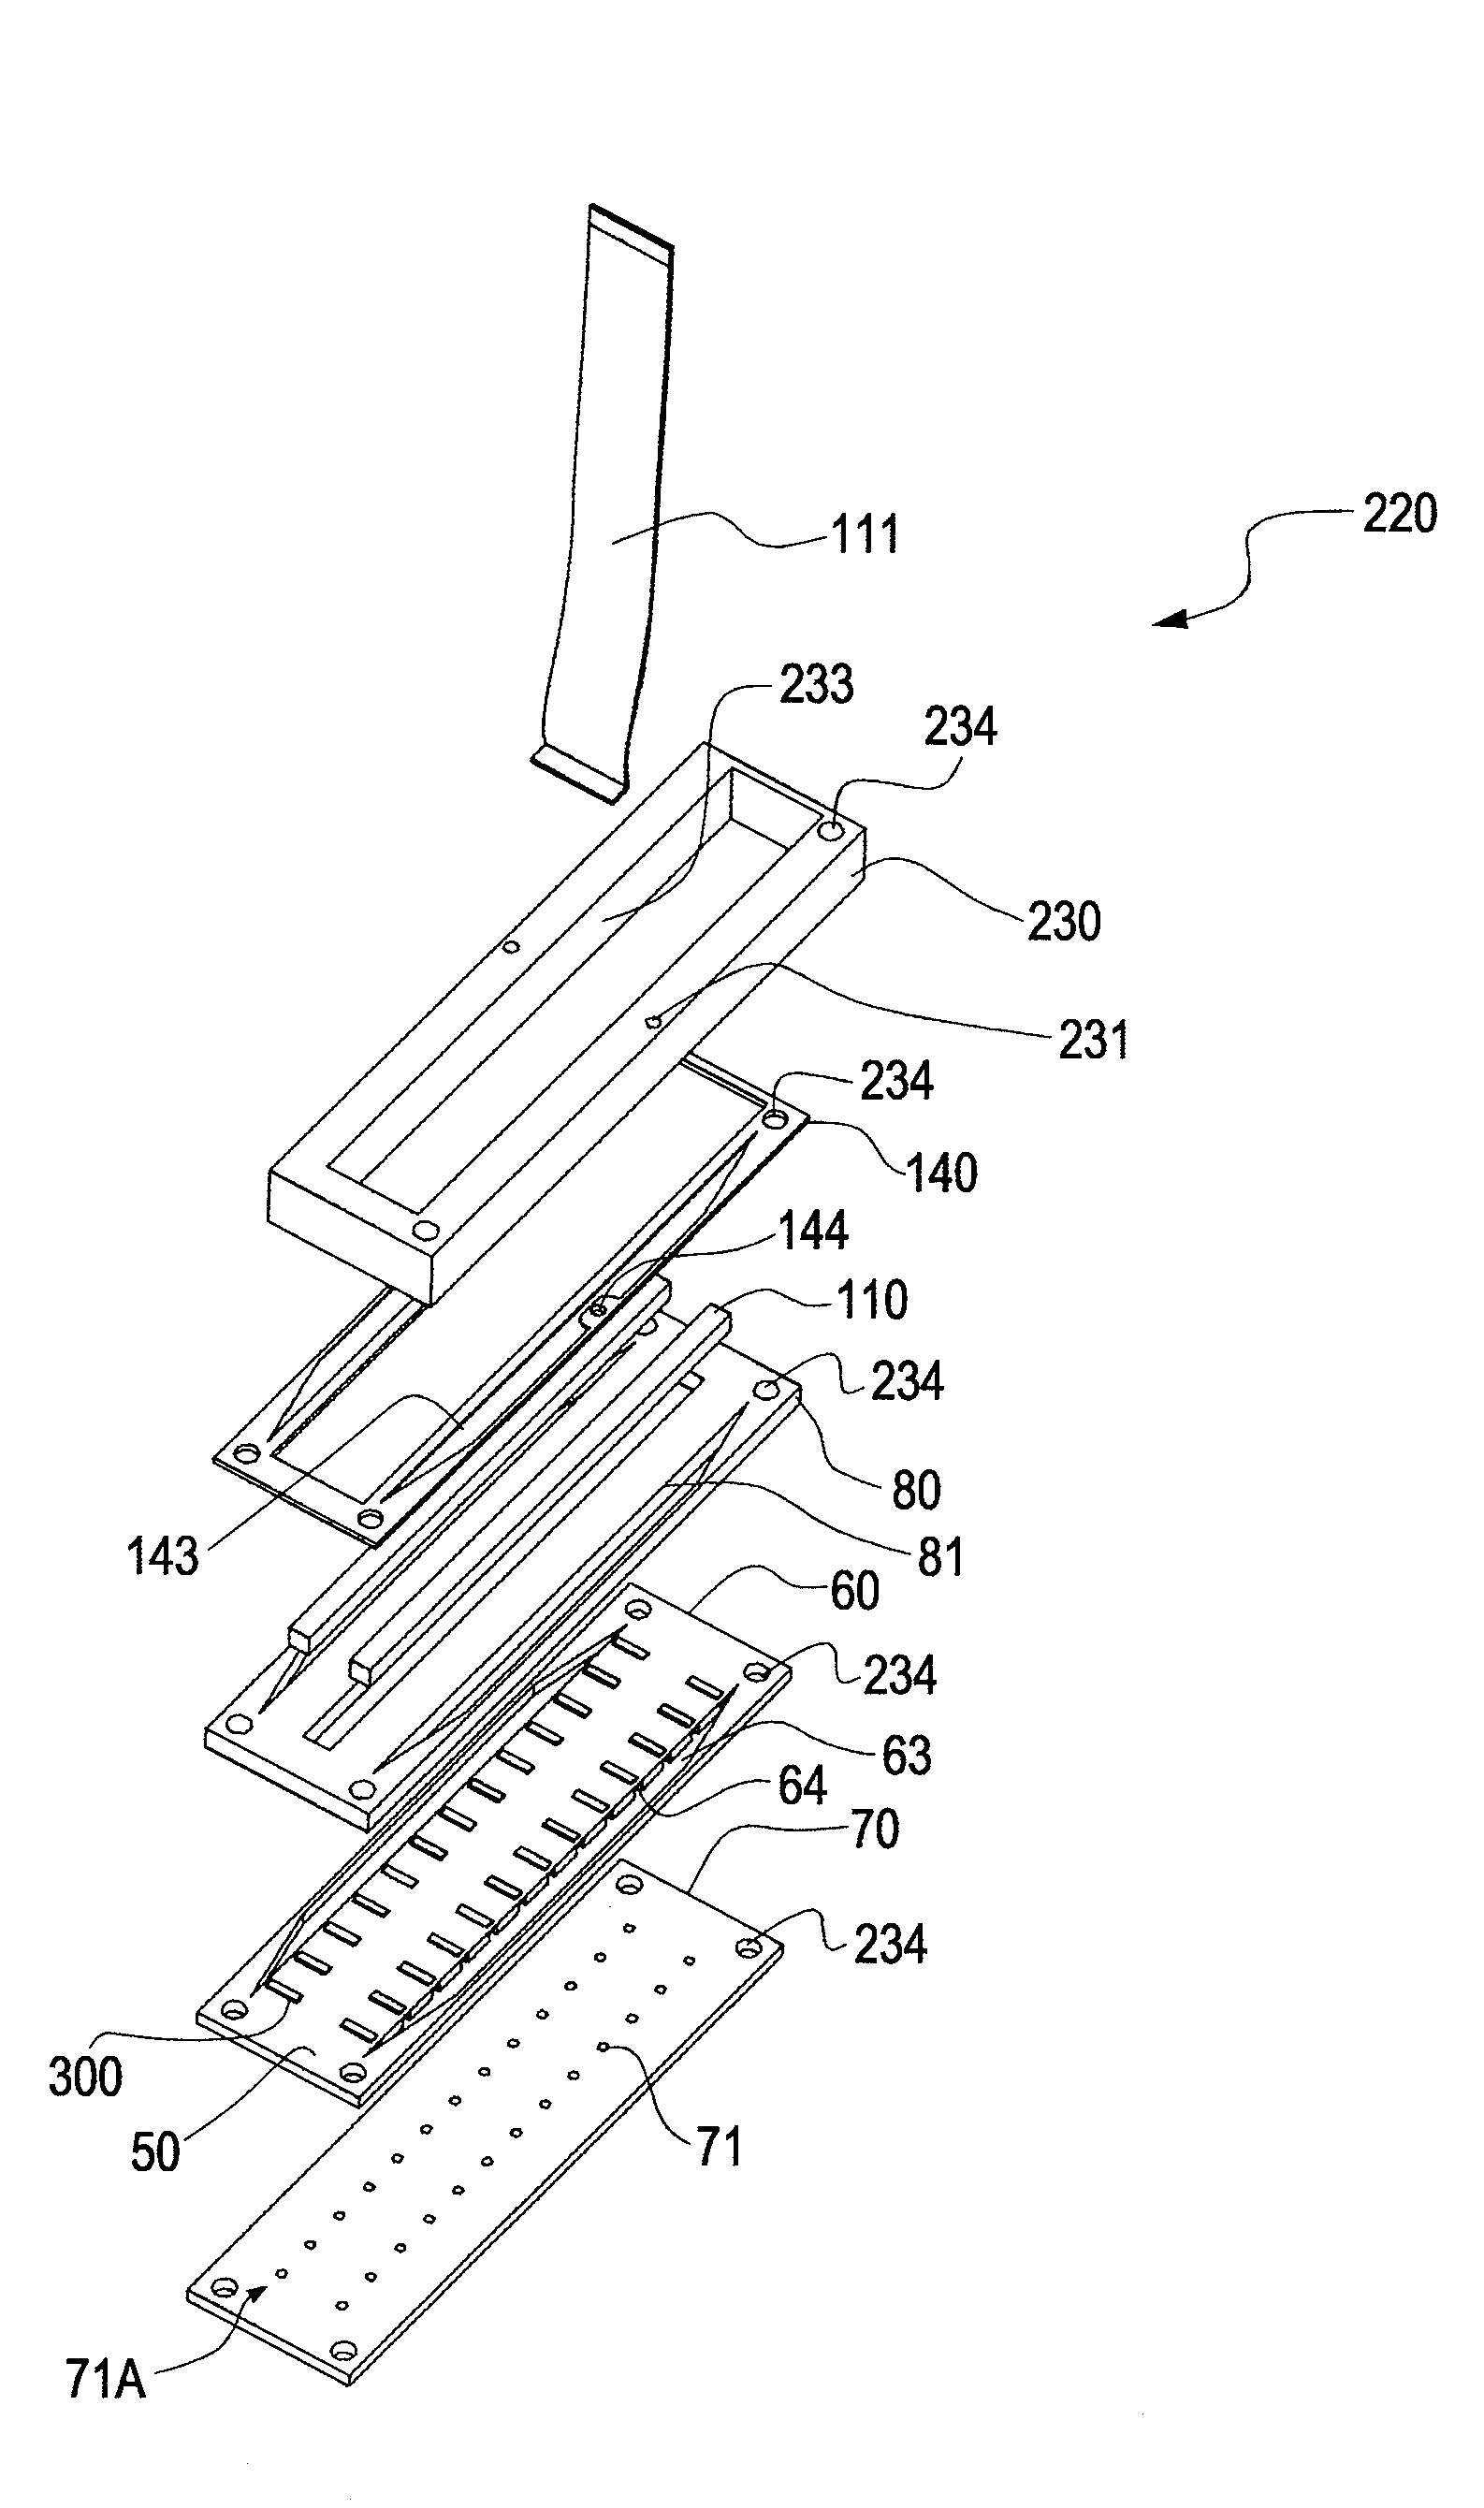 Liquid ejecting head, method for manufacturing liquid ejecting head, and liquid ejecting apparatus